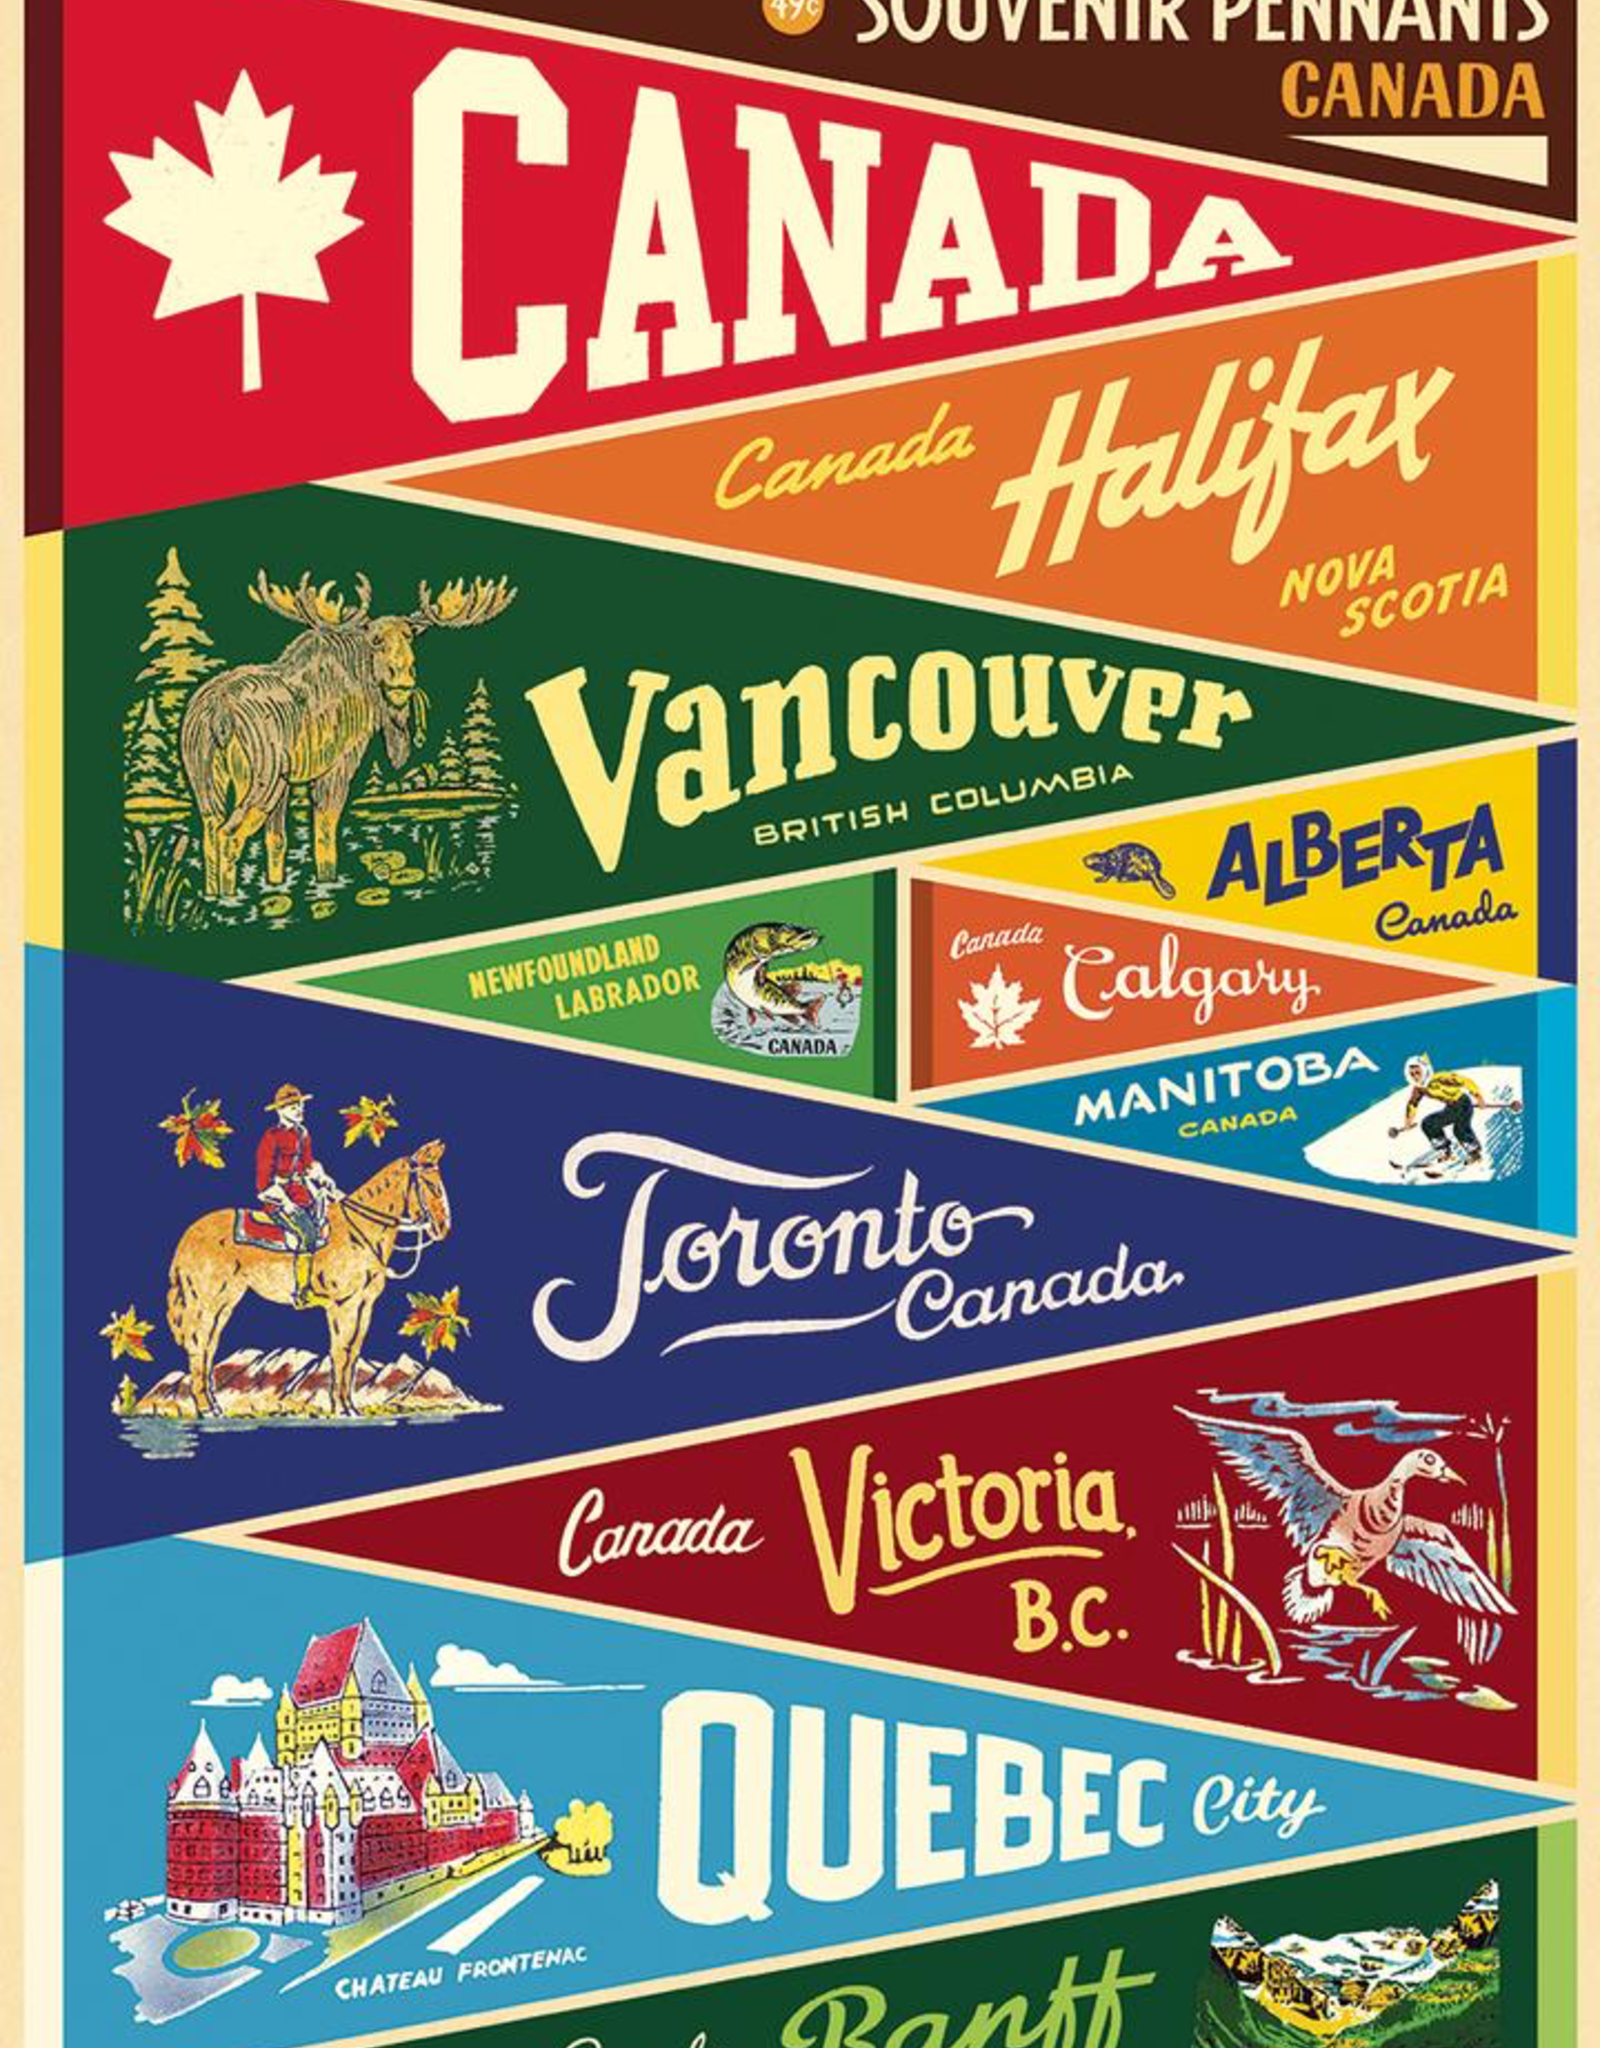 Cavallini Papers Cavallini Papers Canada Pennants Wrap